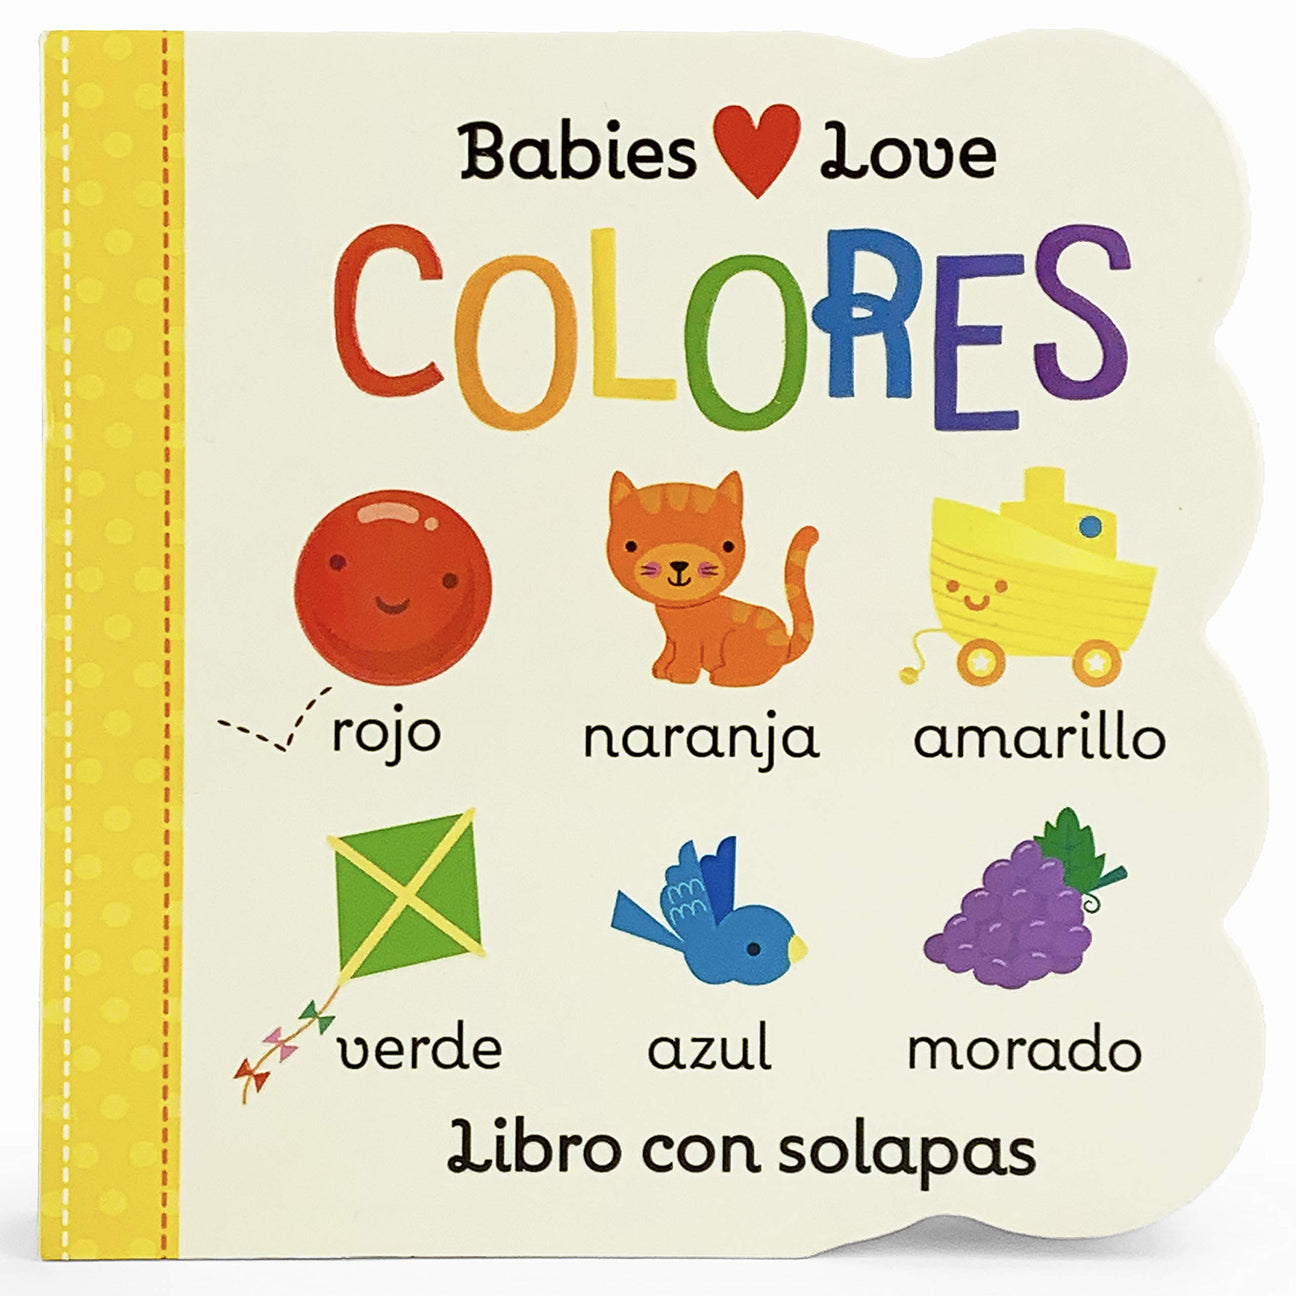 Babies Love Colores-Spanish